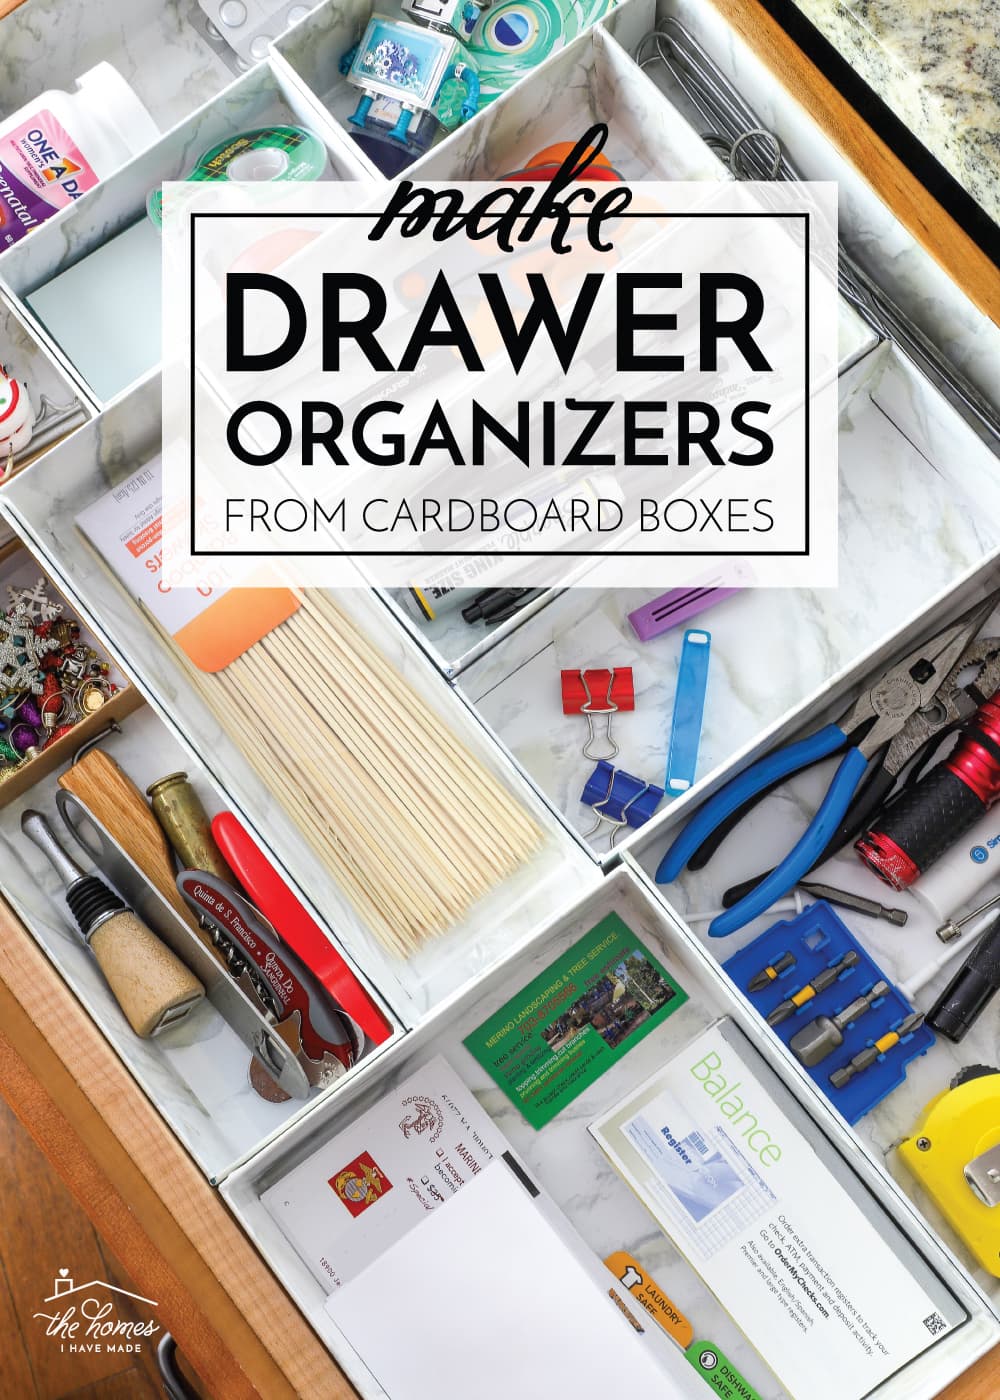 https://thehomesihavemade.com/wp-content/uploads/2020/05/Drawer-Organizers-with-Cardboard-Boxes_1new.jpg